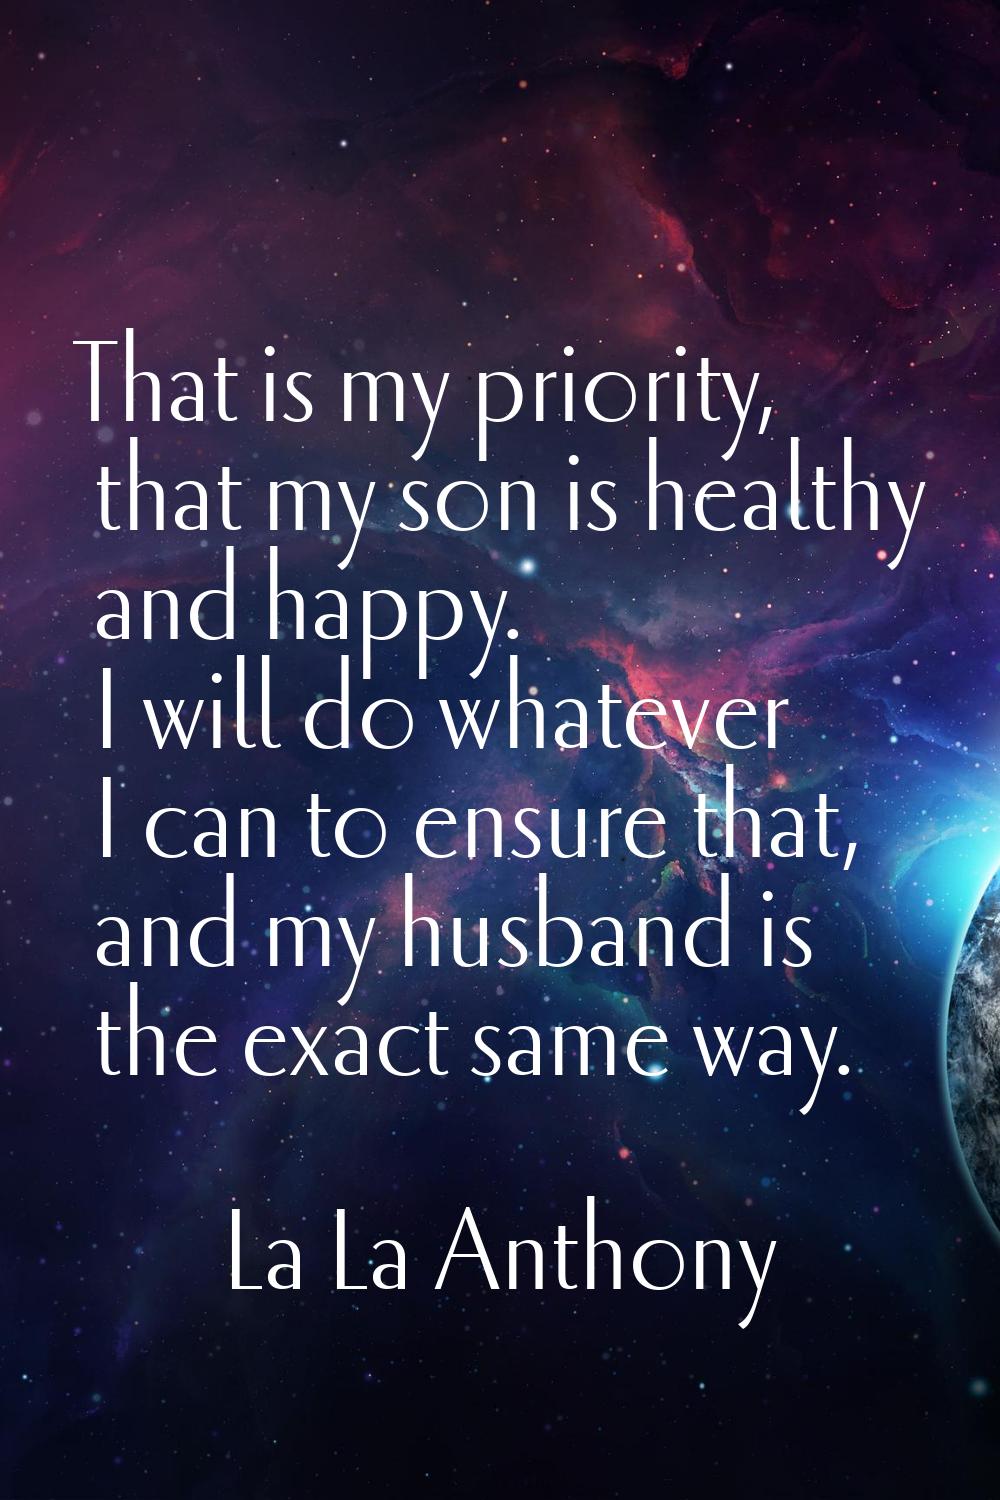 That is my priority, that my son is healthy and happy. I will do whatever I can to ensure that, and